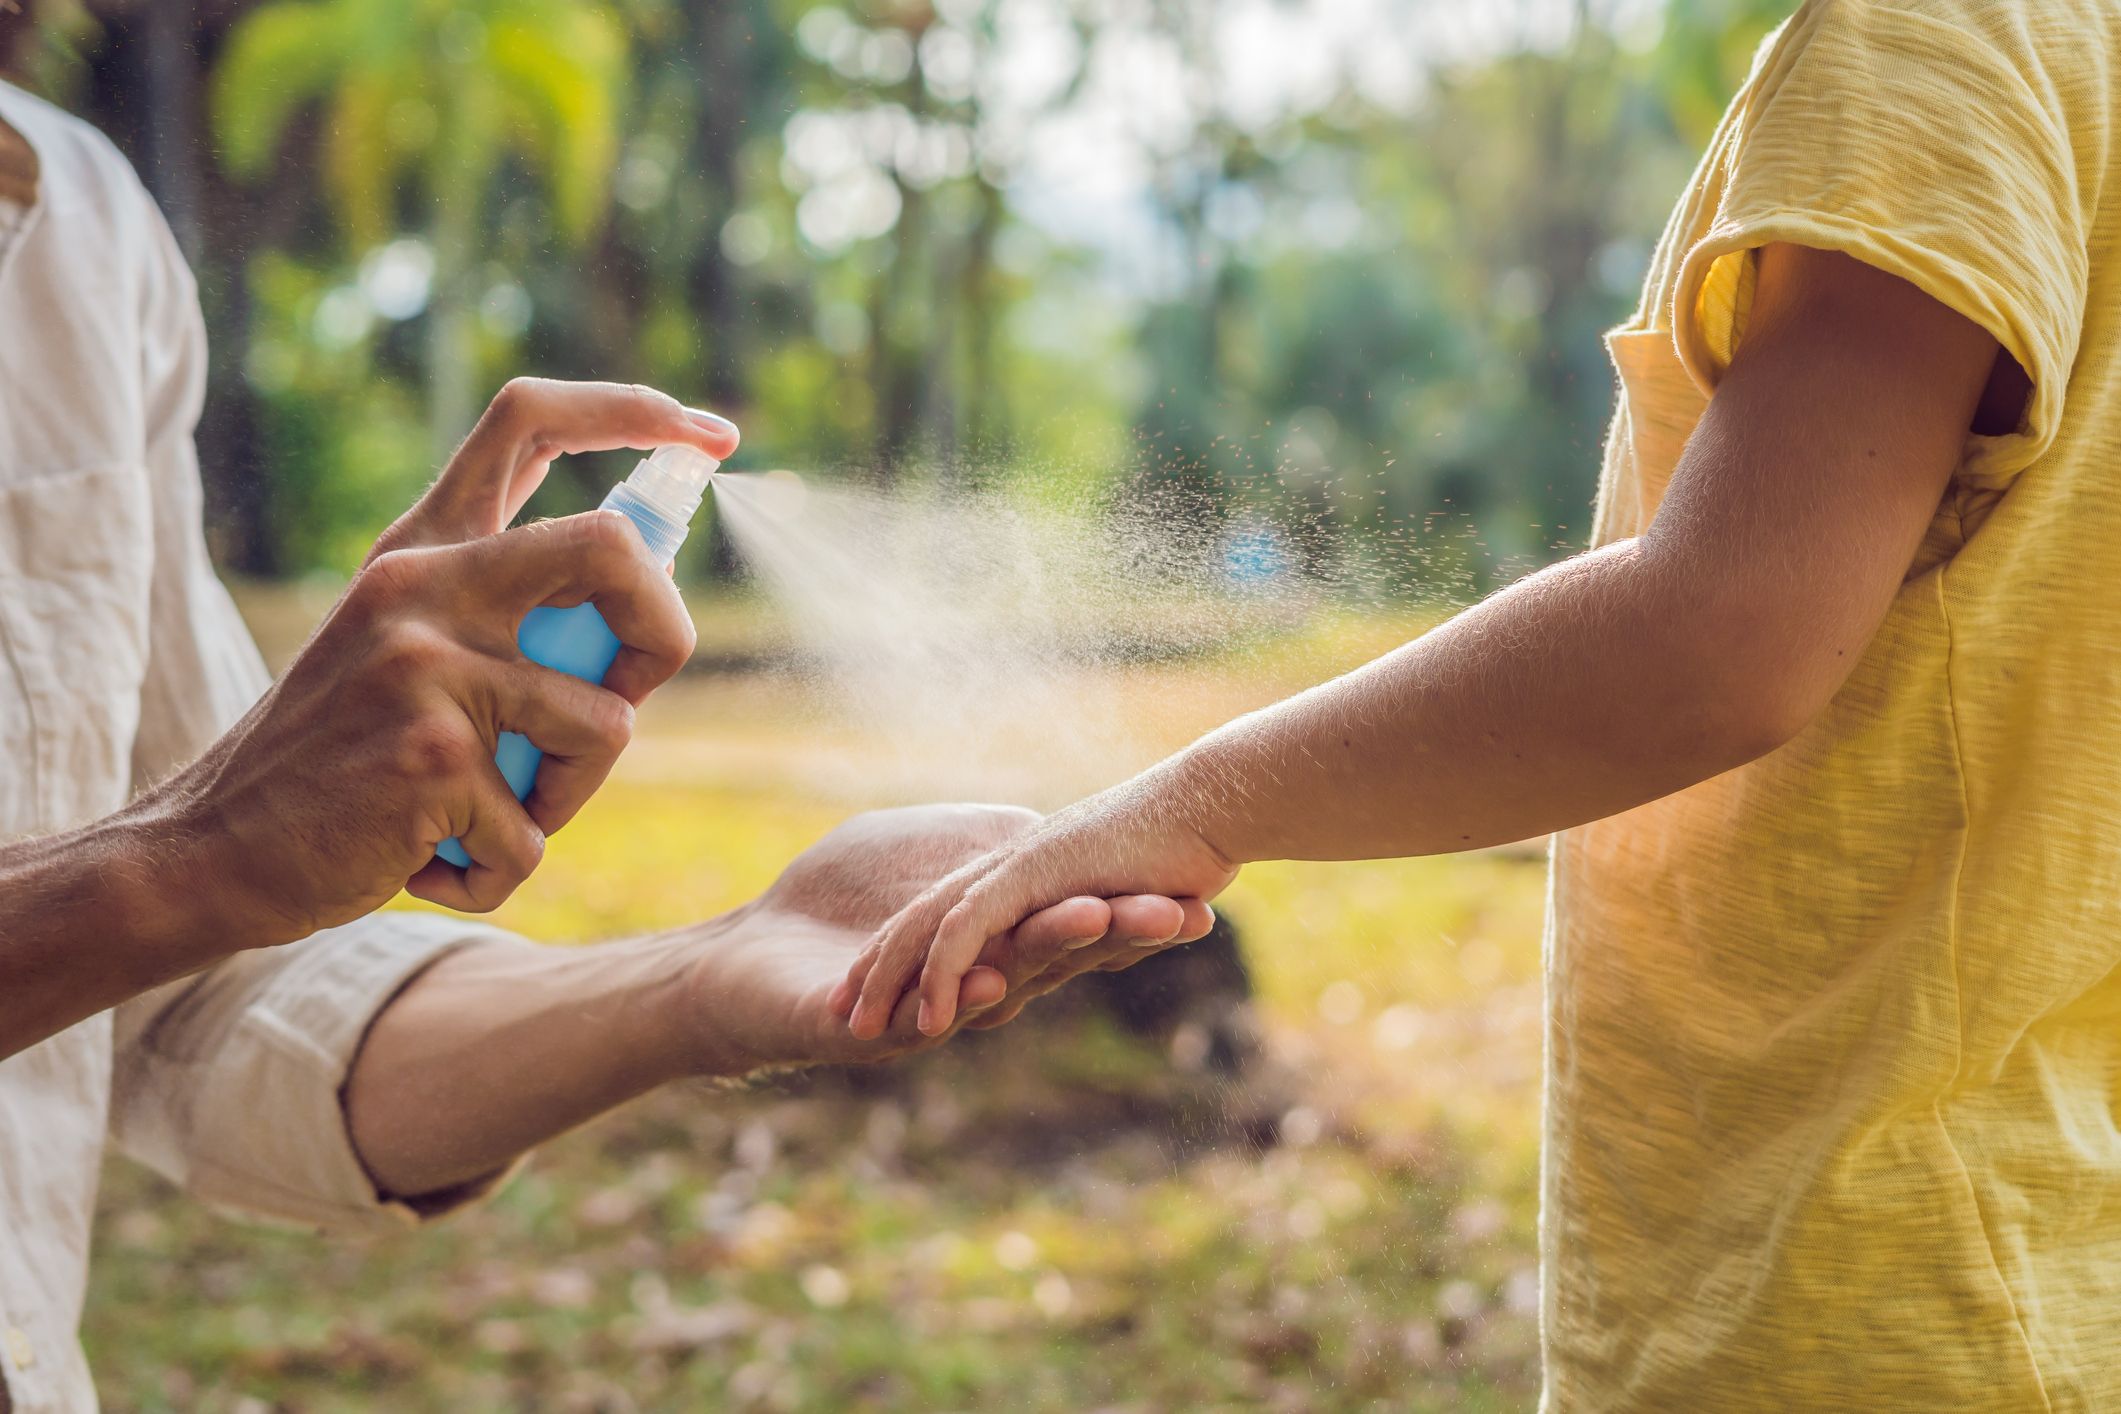 Despite safety concerns around the use of DEET, Health Canada has approved its use when applied as directed and in the right concentration. GETTY